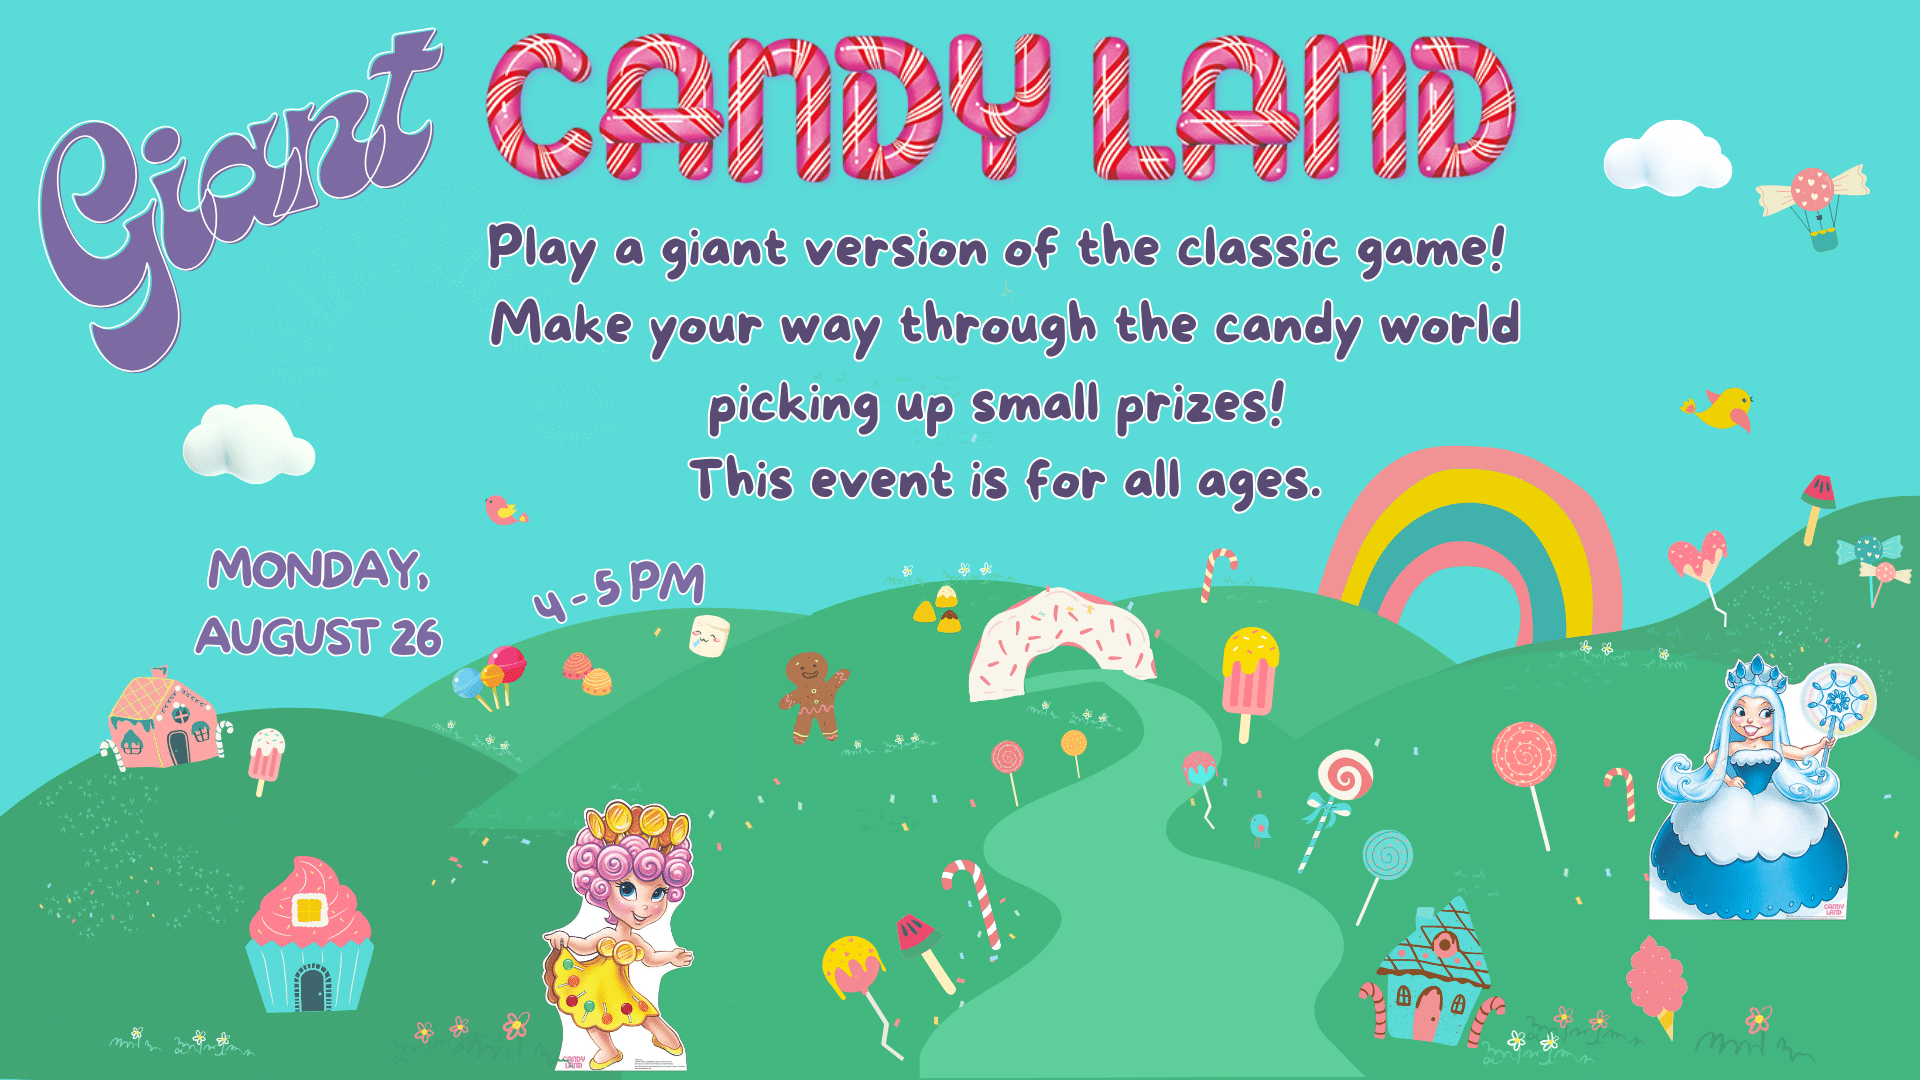 Giant Candyland, Monday, August 26 at 4:00 pm